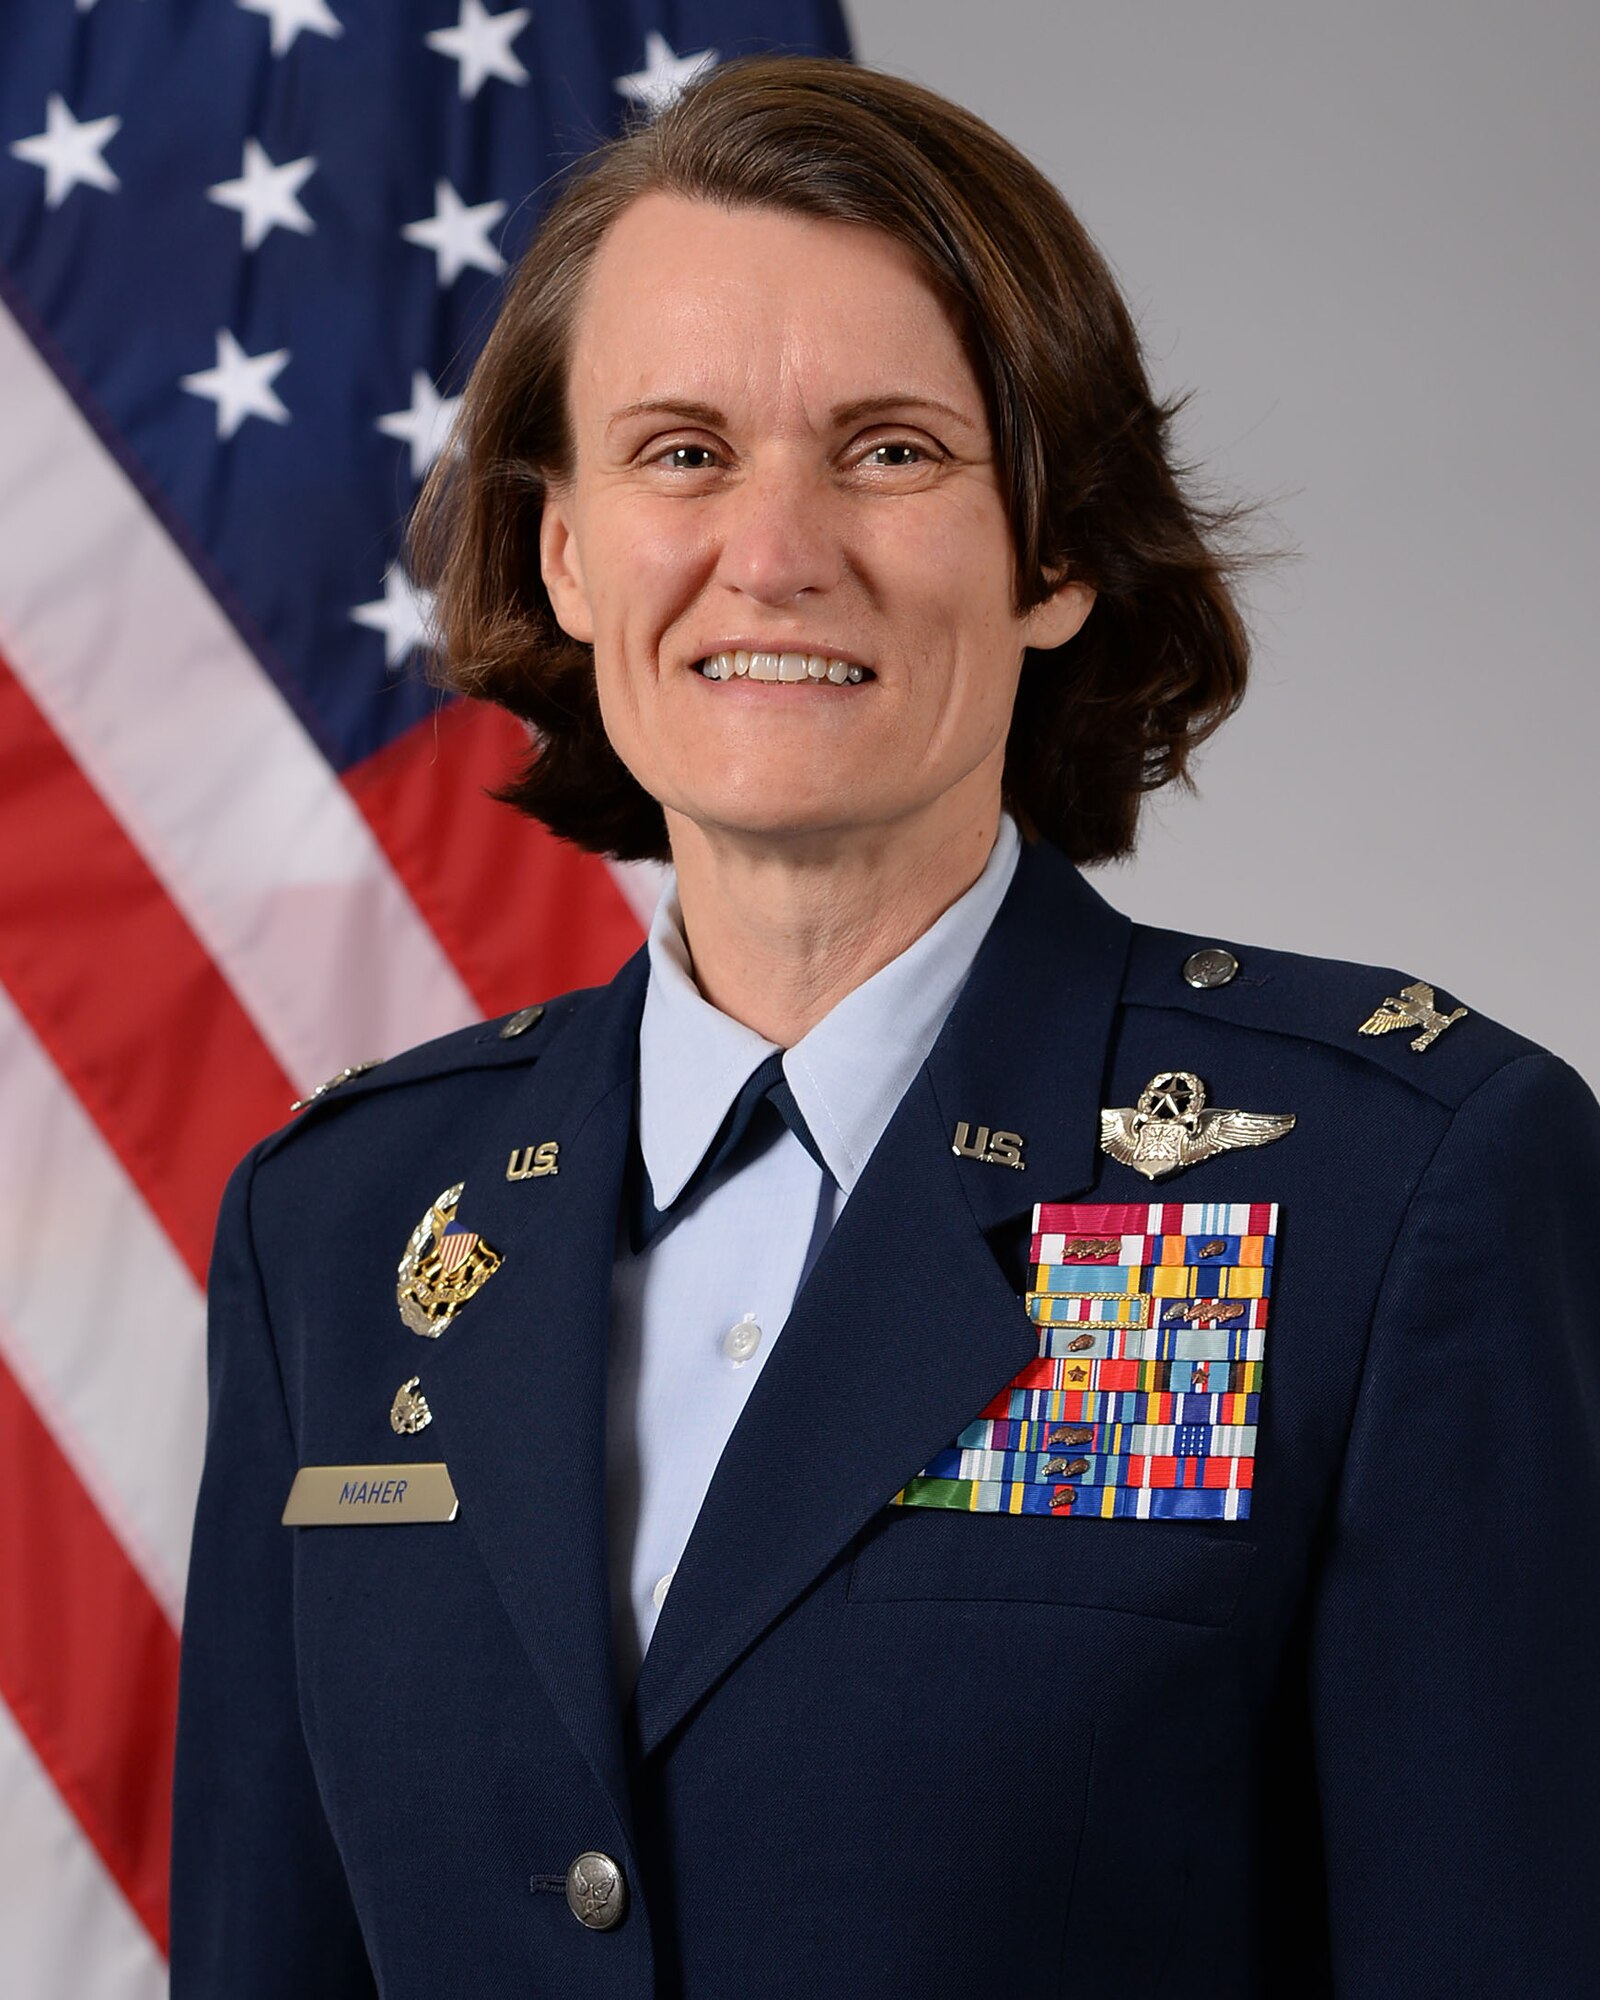 COLONEL LESLIE A. MAHER